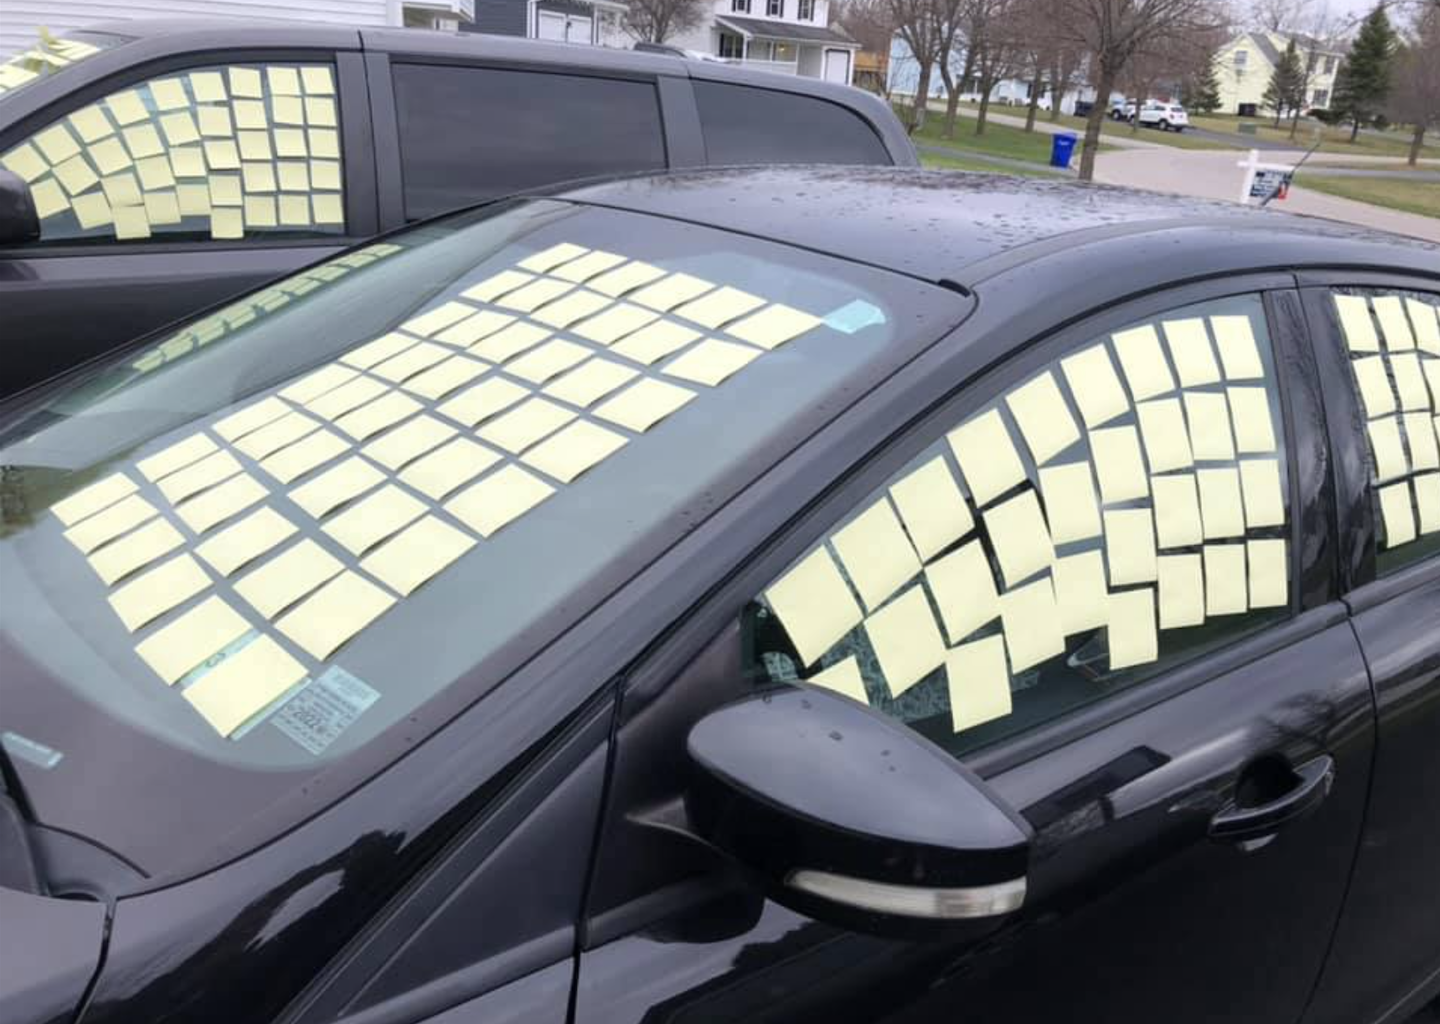 Car plastered with post-it notes April Fools Day prank